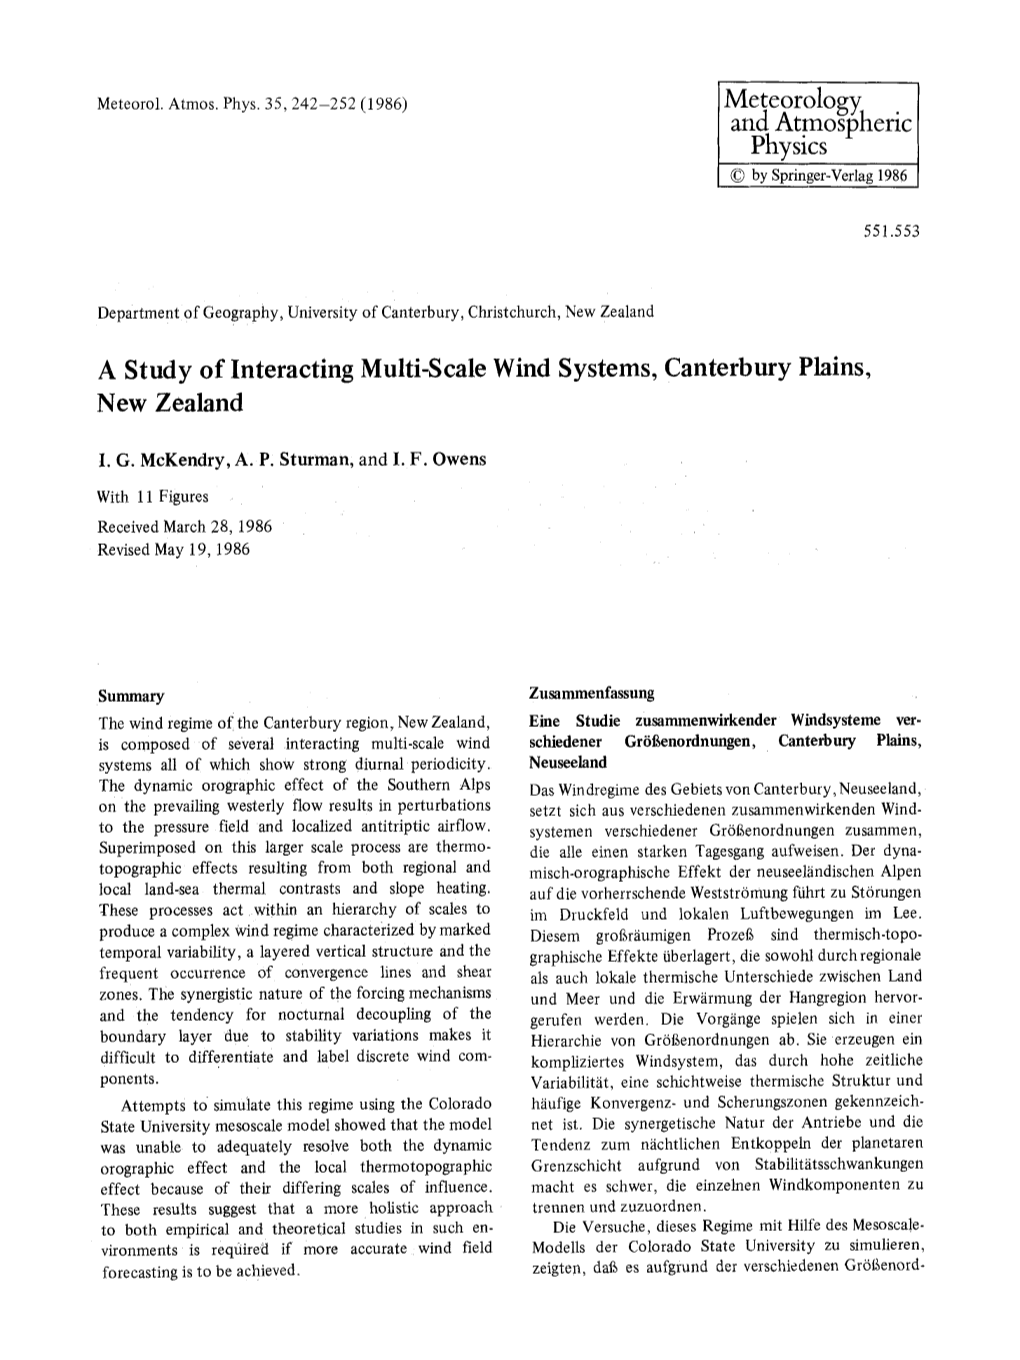 A Study of Interacting Multi-Scale Wind Systems, Canterbury Plains, New Zealand